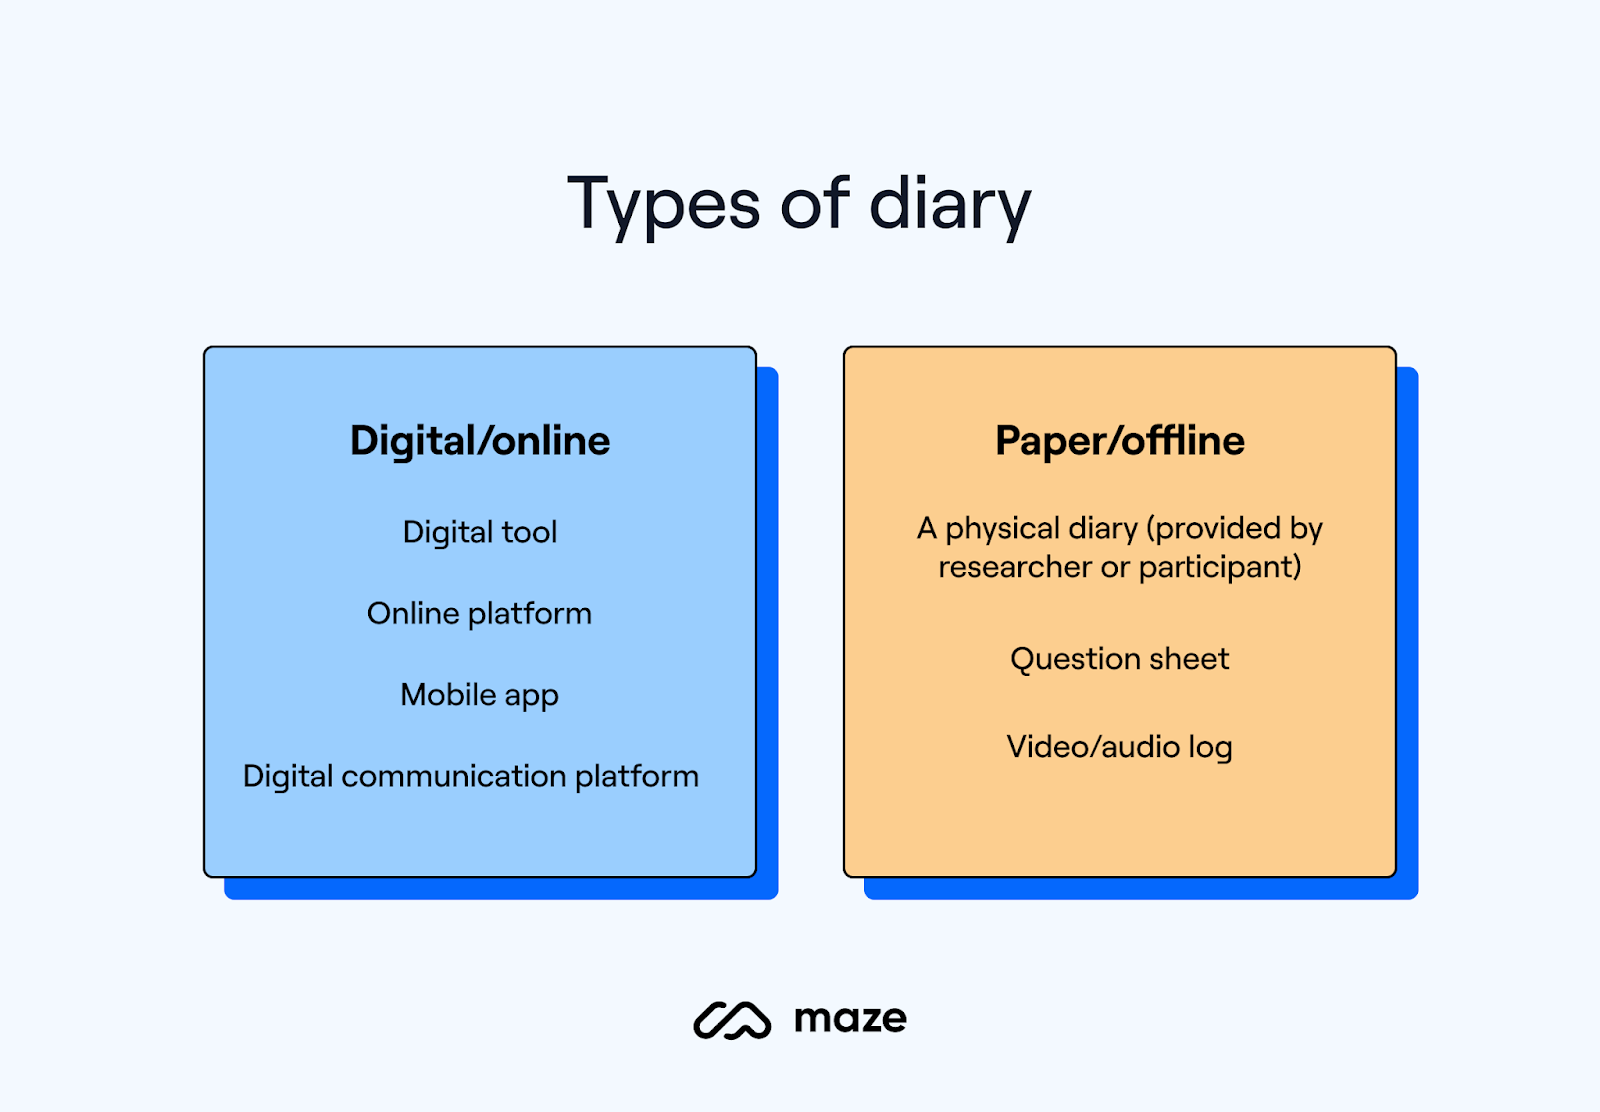 Types of diary for diary studies